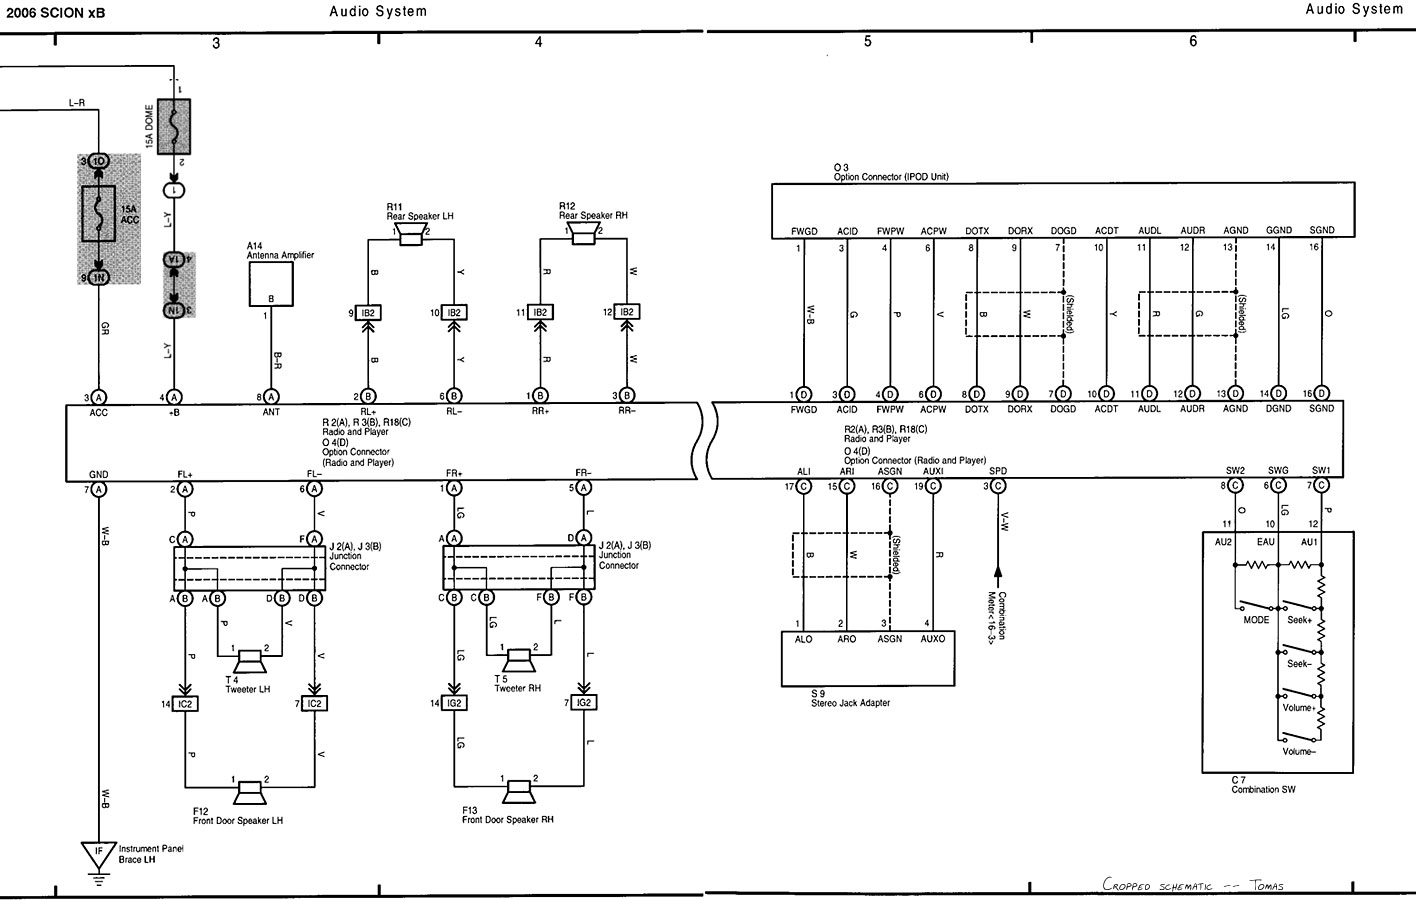 Radio Wiring Diagram For 08 Cadillac Sts from www.automotive-manuals.net